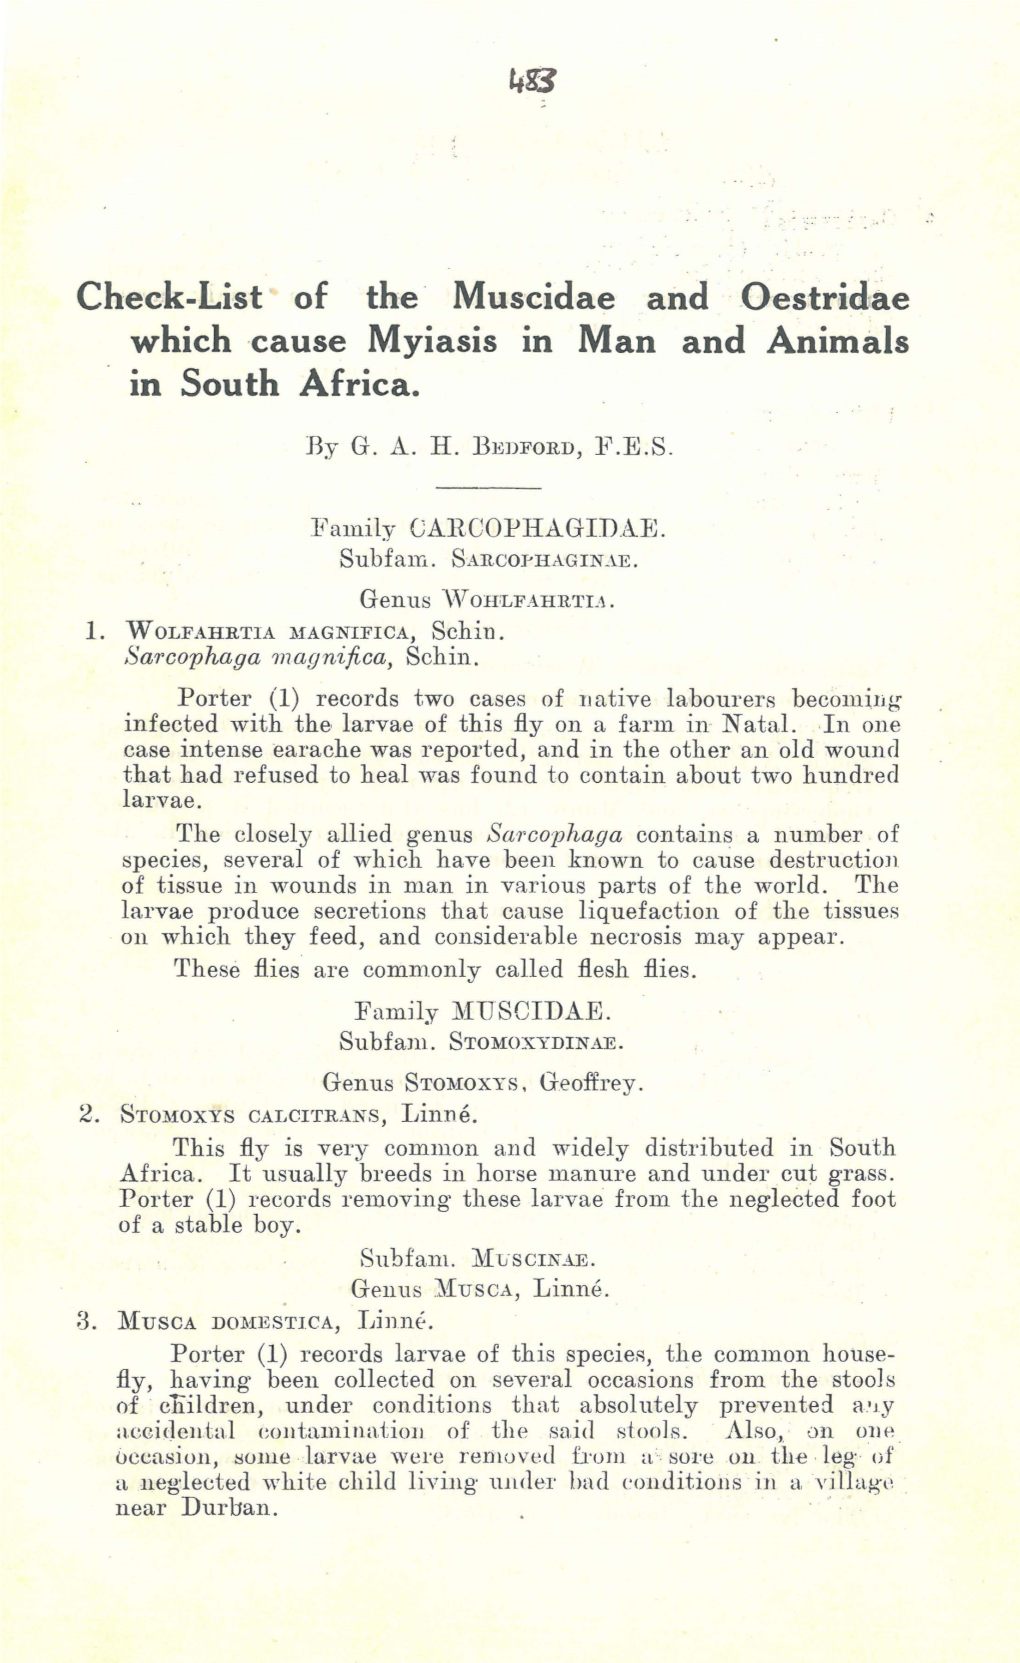 Check-List of the Muscidae and .Oestridae Which ·Cause Myiasis in Man and Animals in South Africa